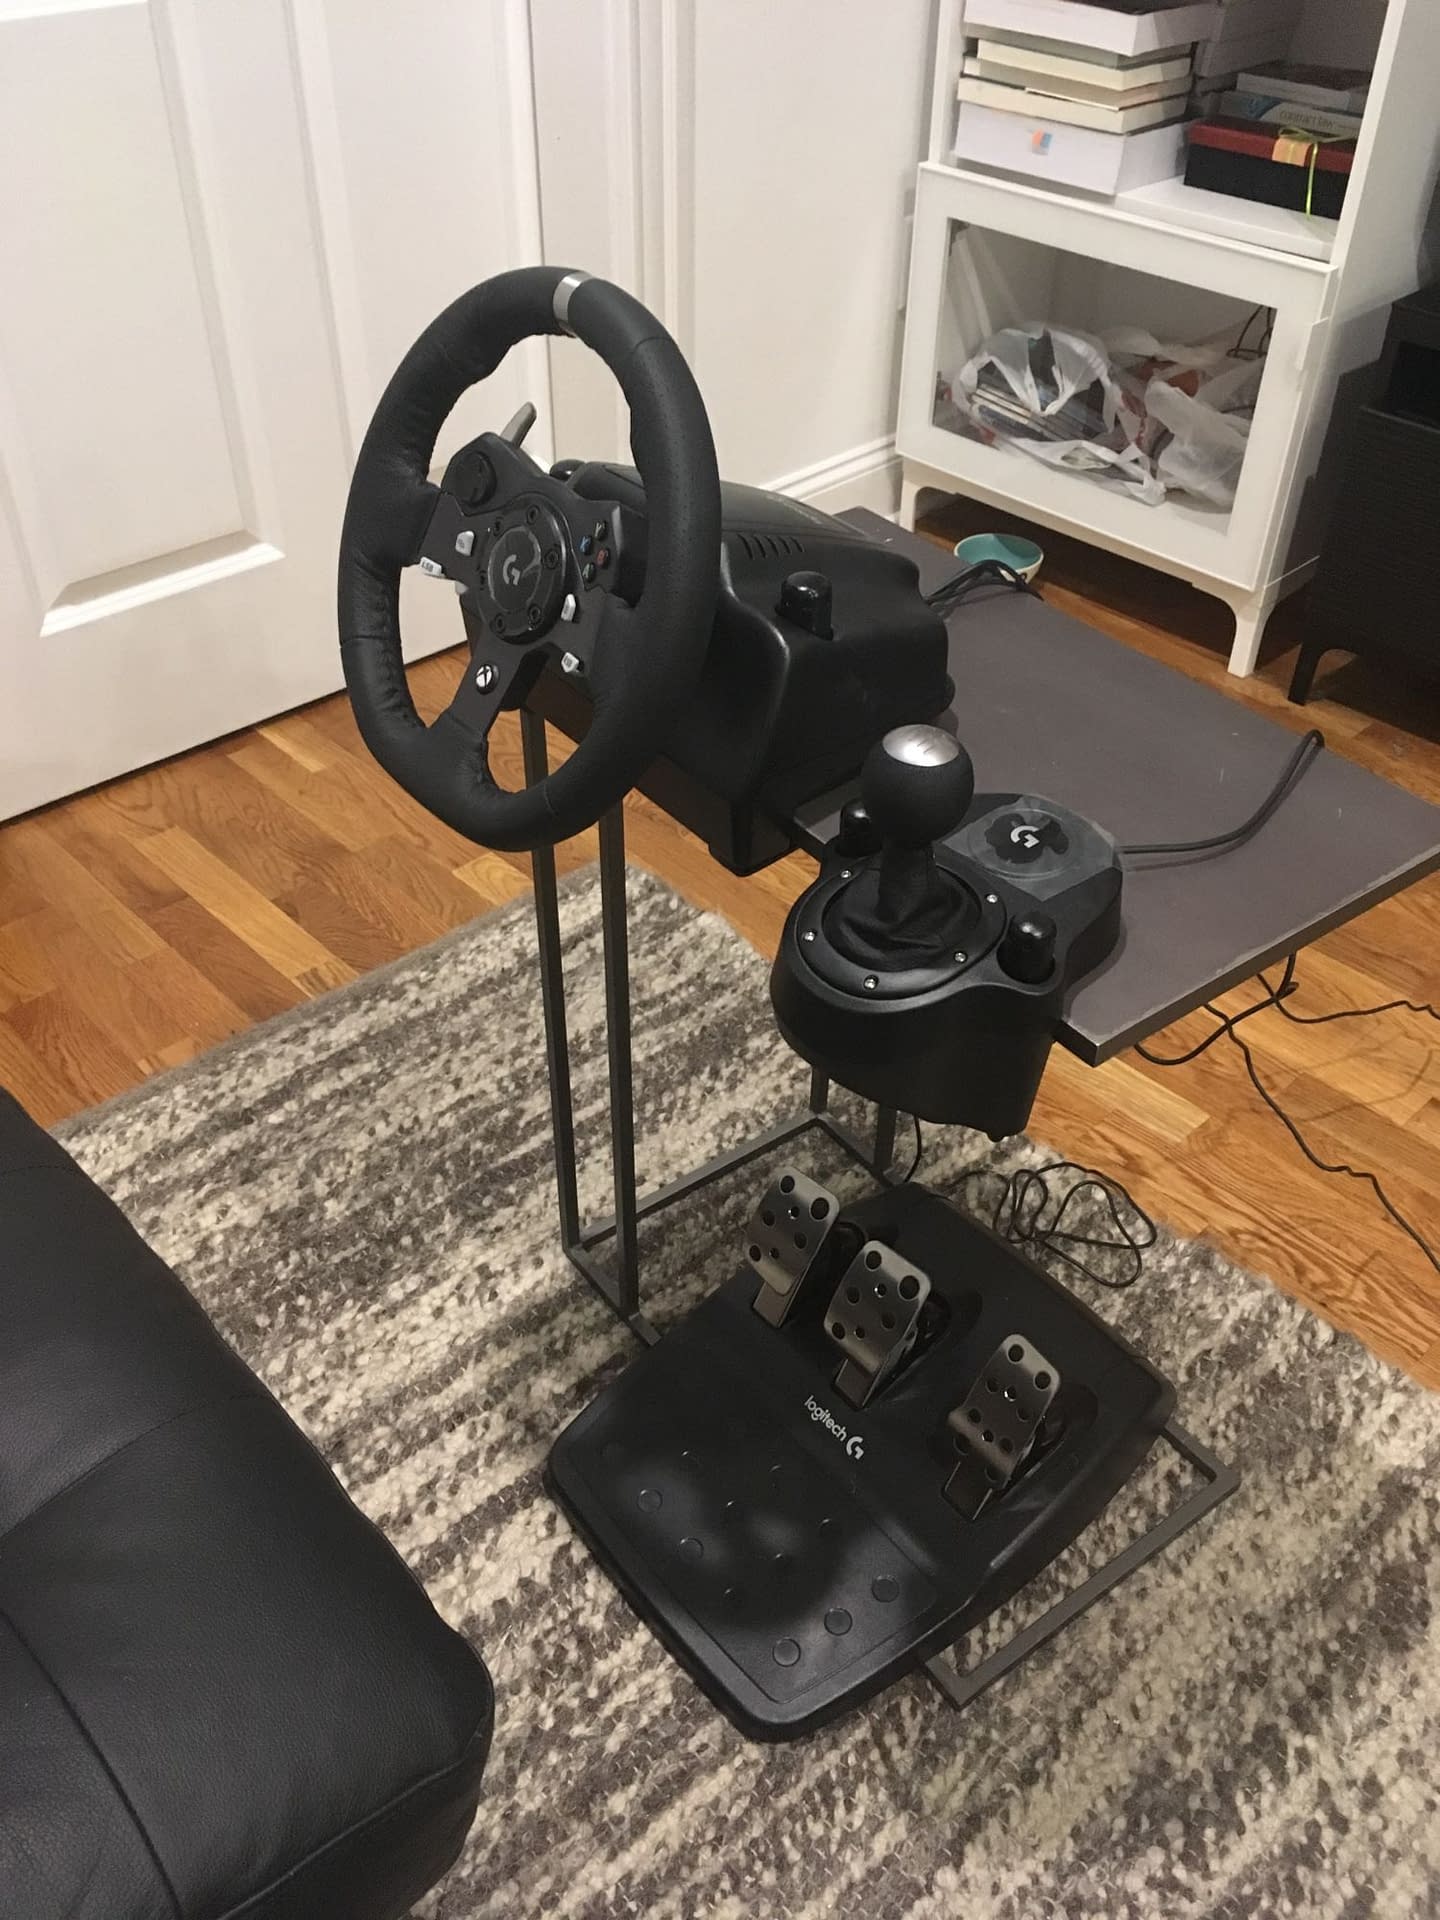 Logitech's Driving Force G920 Wheel, Pedals, and Shifter are Good